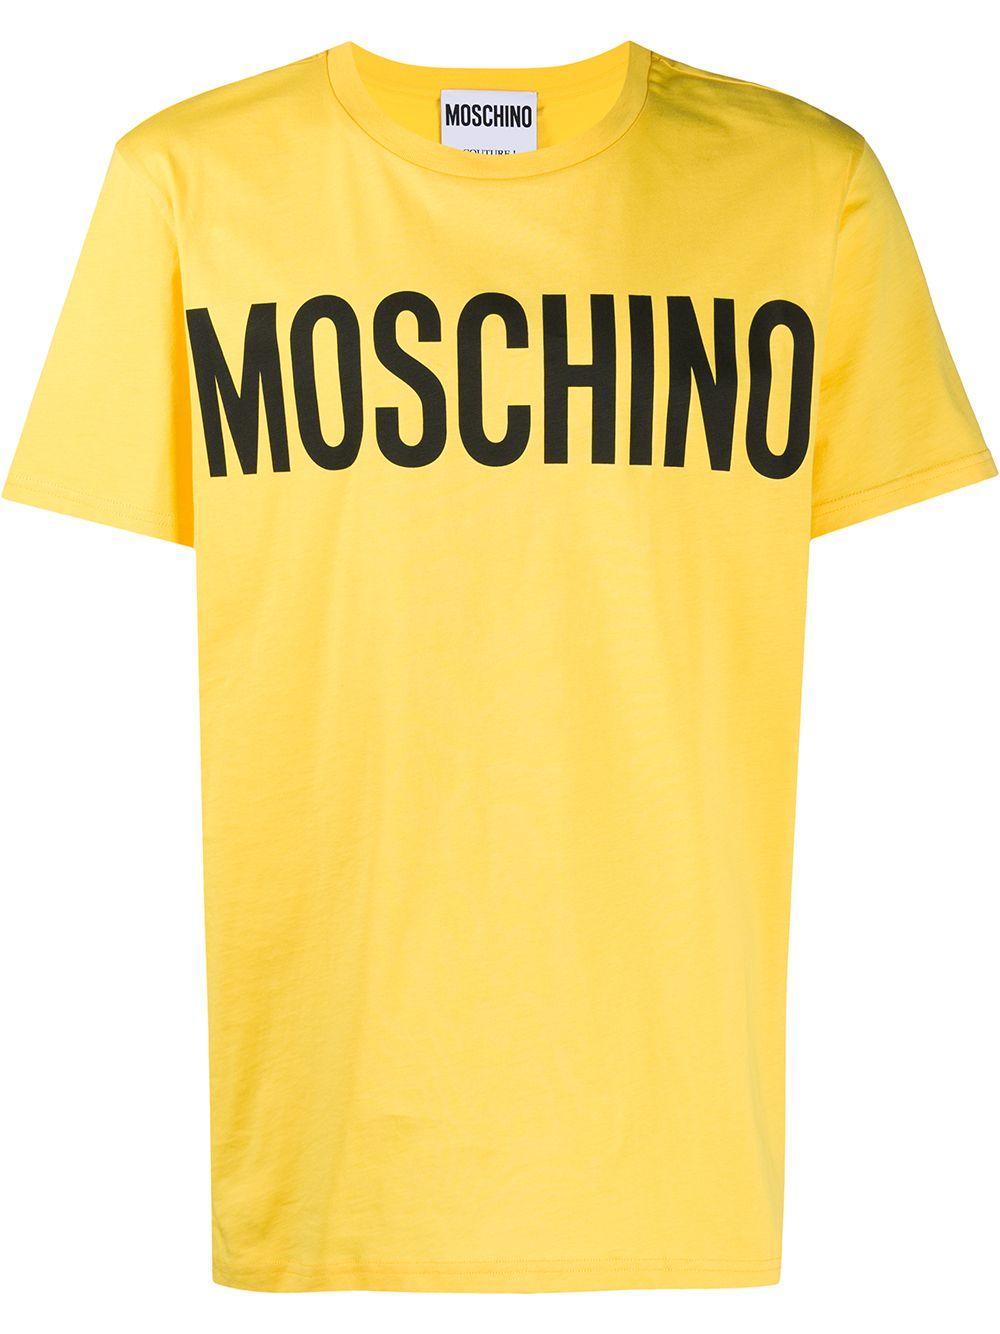 Moschino Cotton Logo T-shirt in Yellow for Men - Save 30% - Lyst